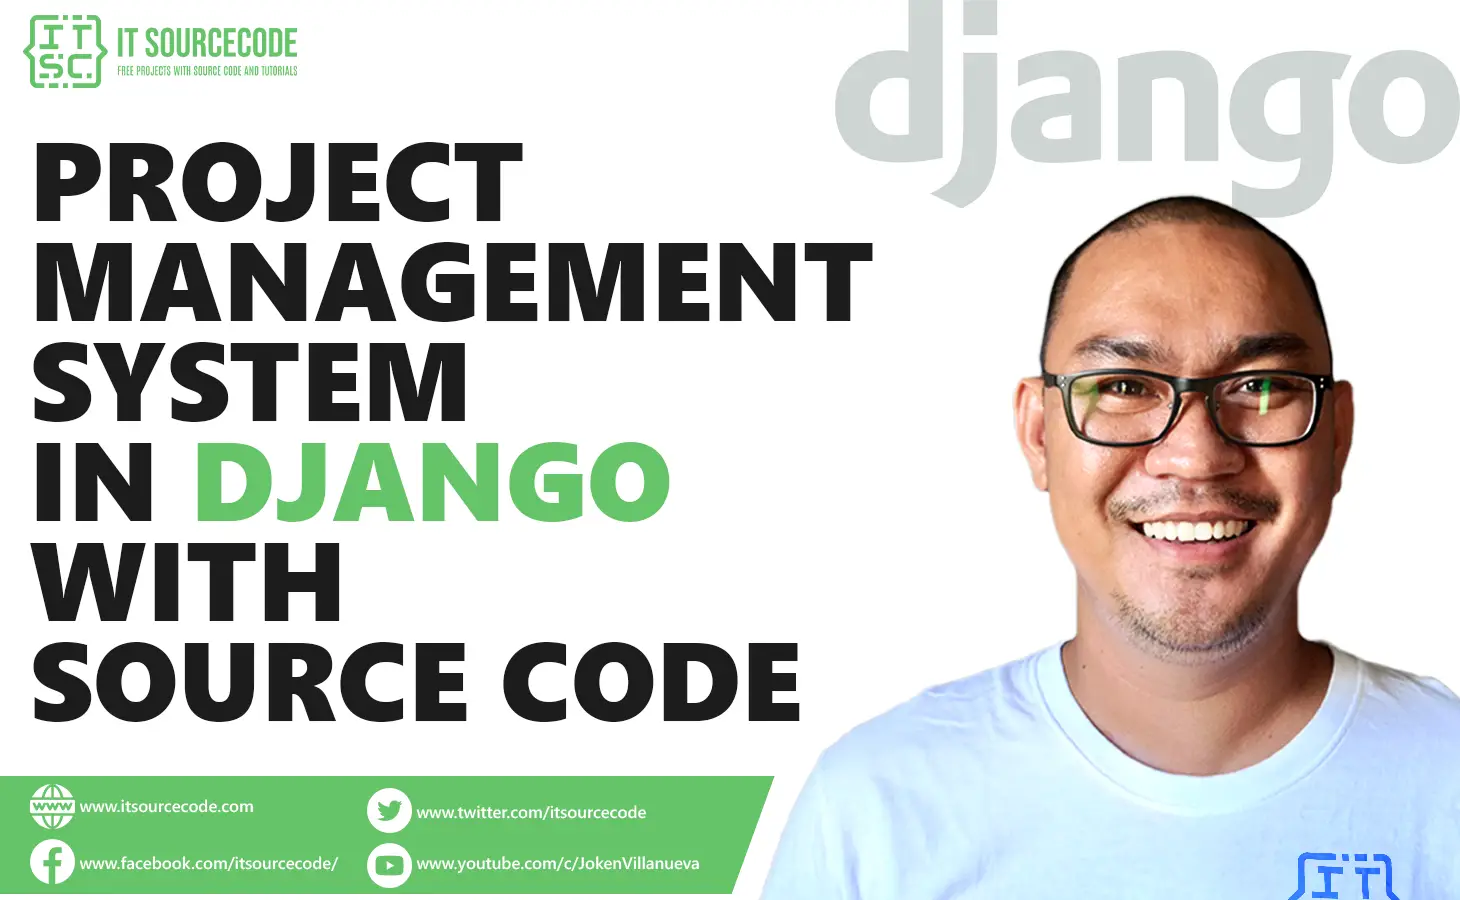 Project Management System in Django with Source Code